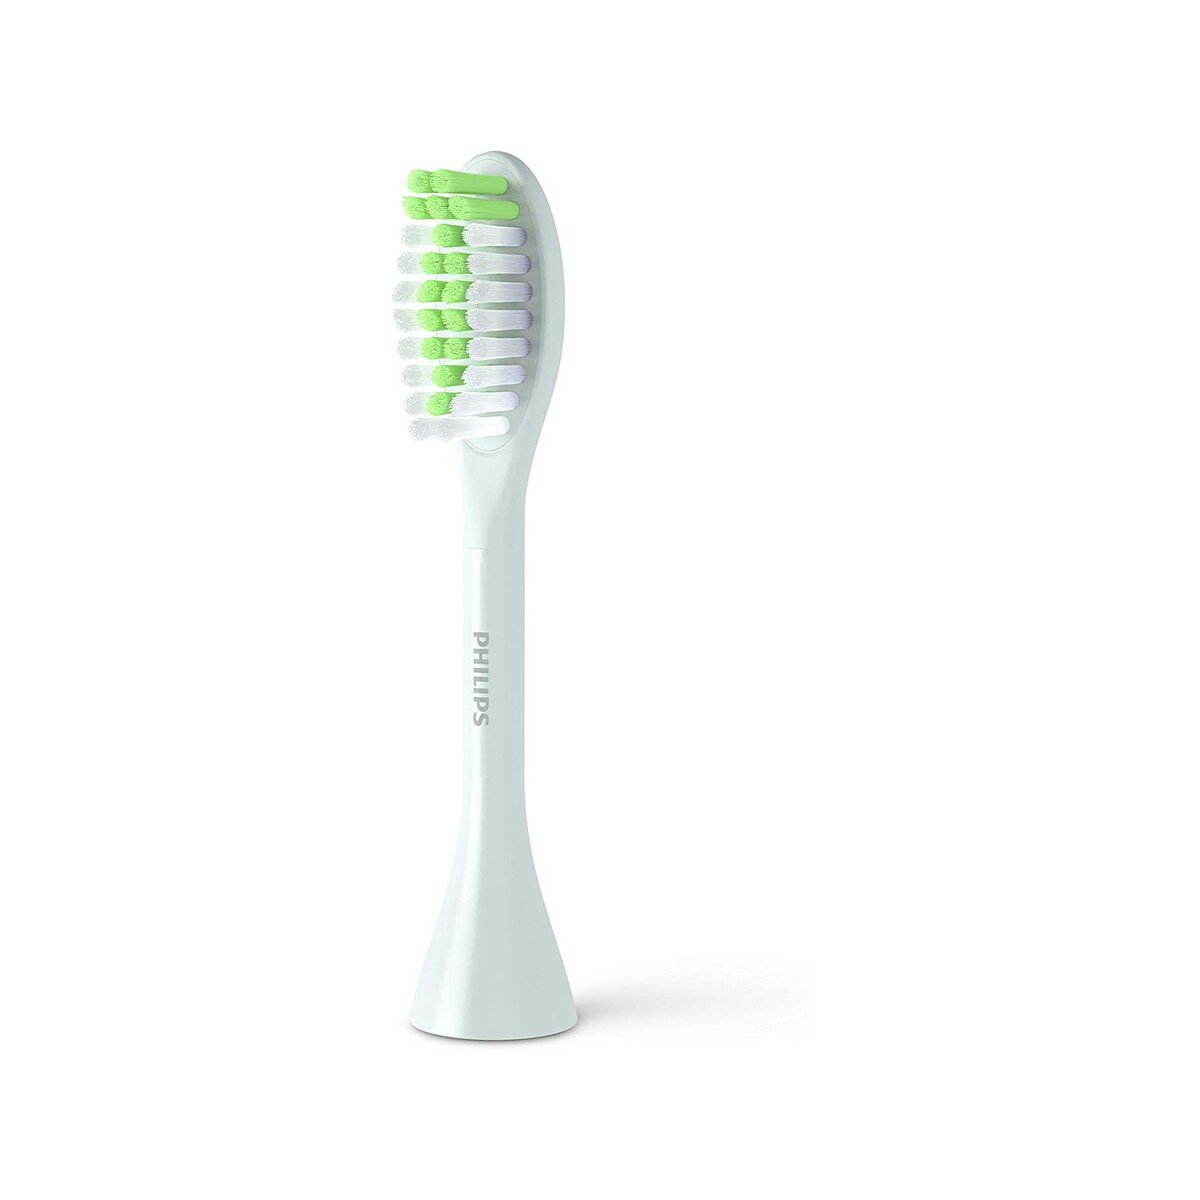 Philips One by Sonicare Brush head Mint Light Blue BH1022